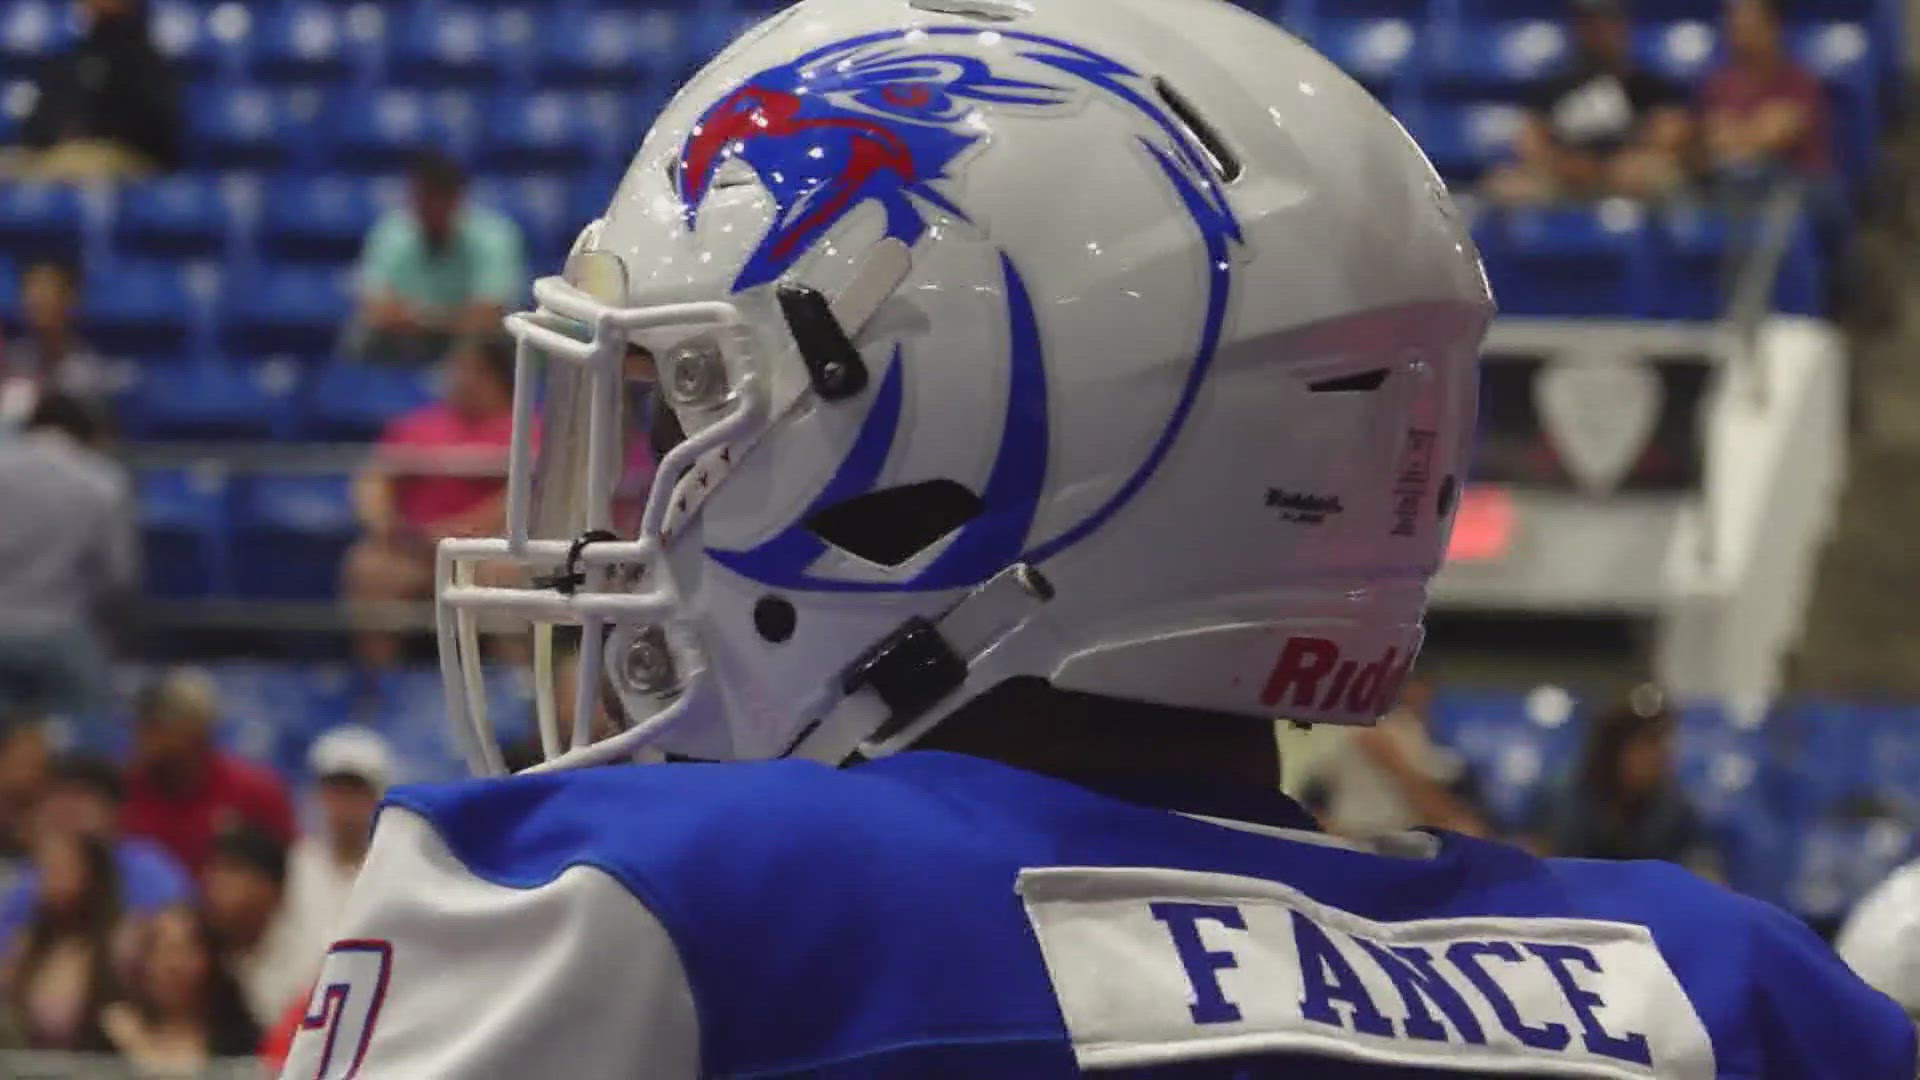 The rumors were that the team will be blocked from continuing to compete in the Arena Football League.